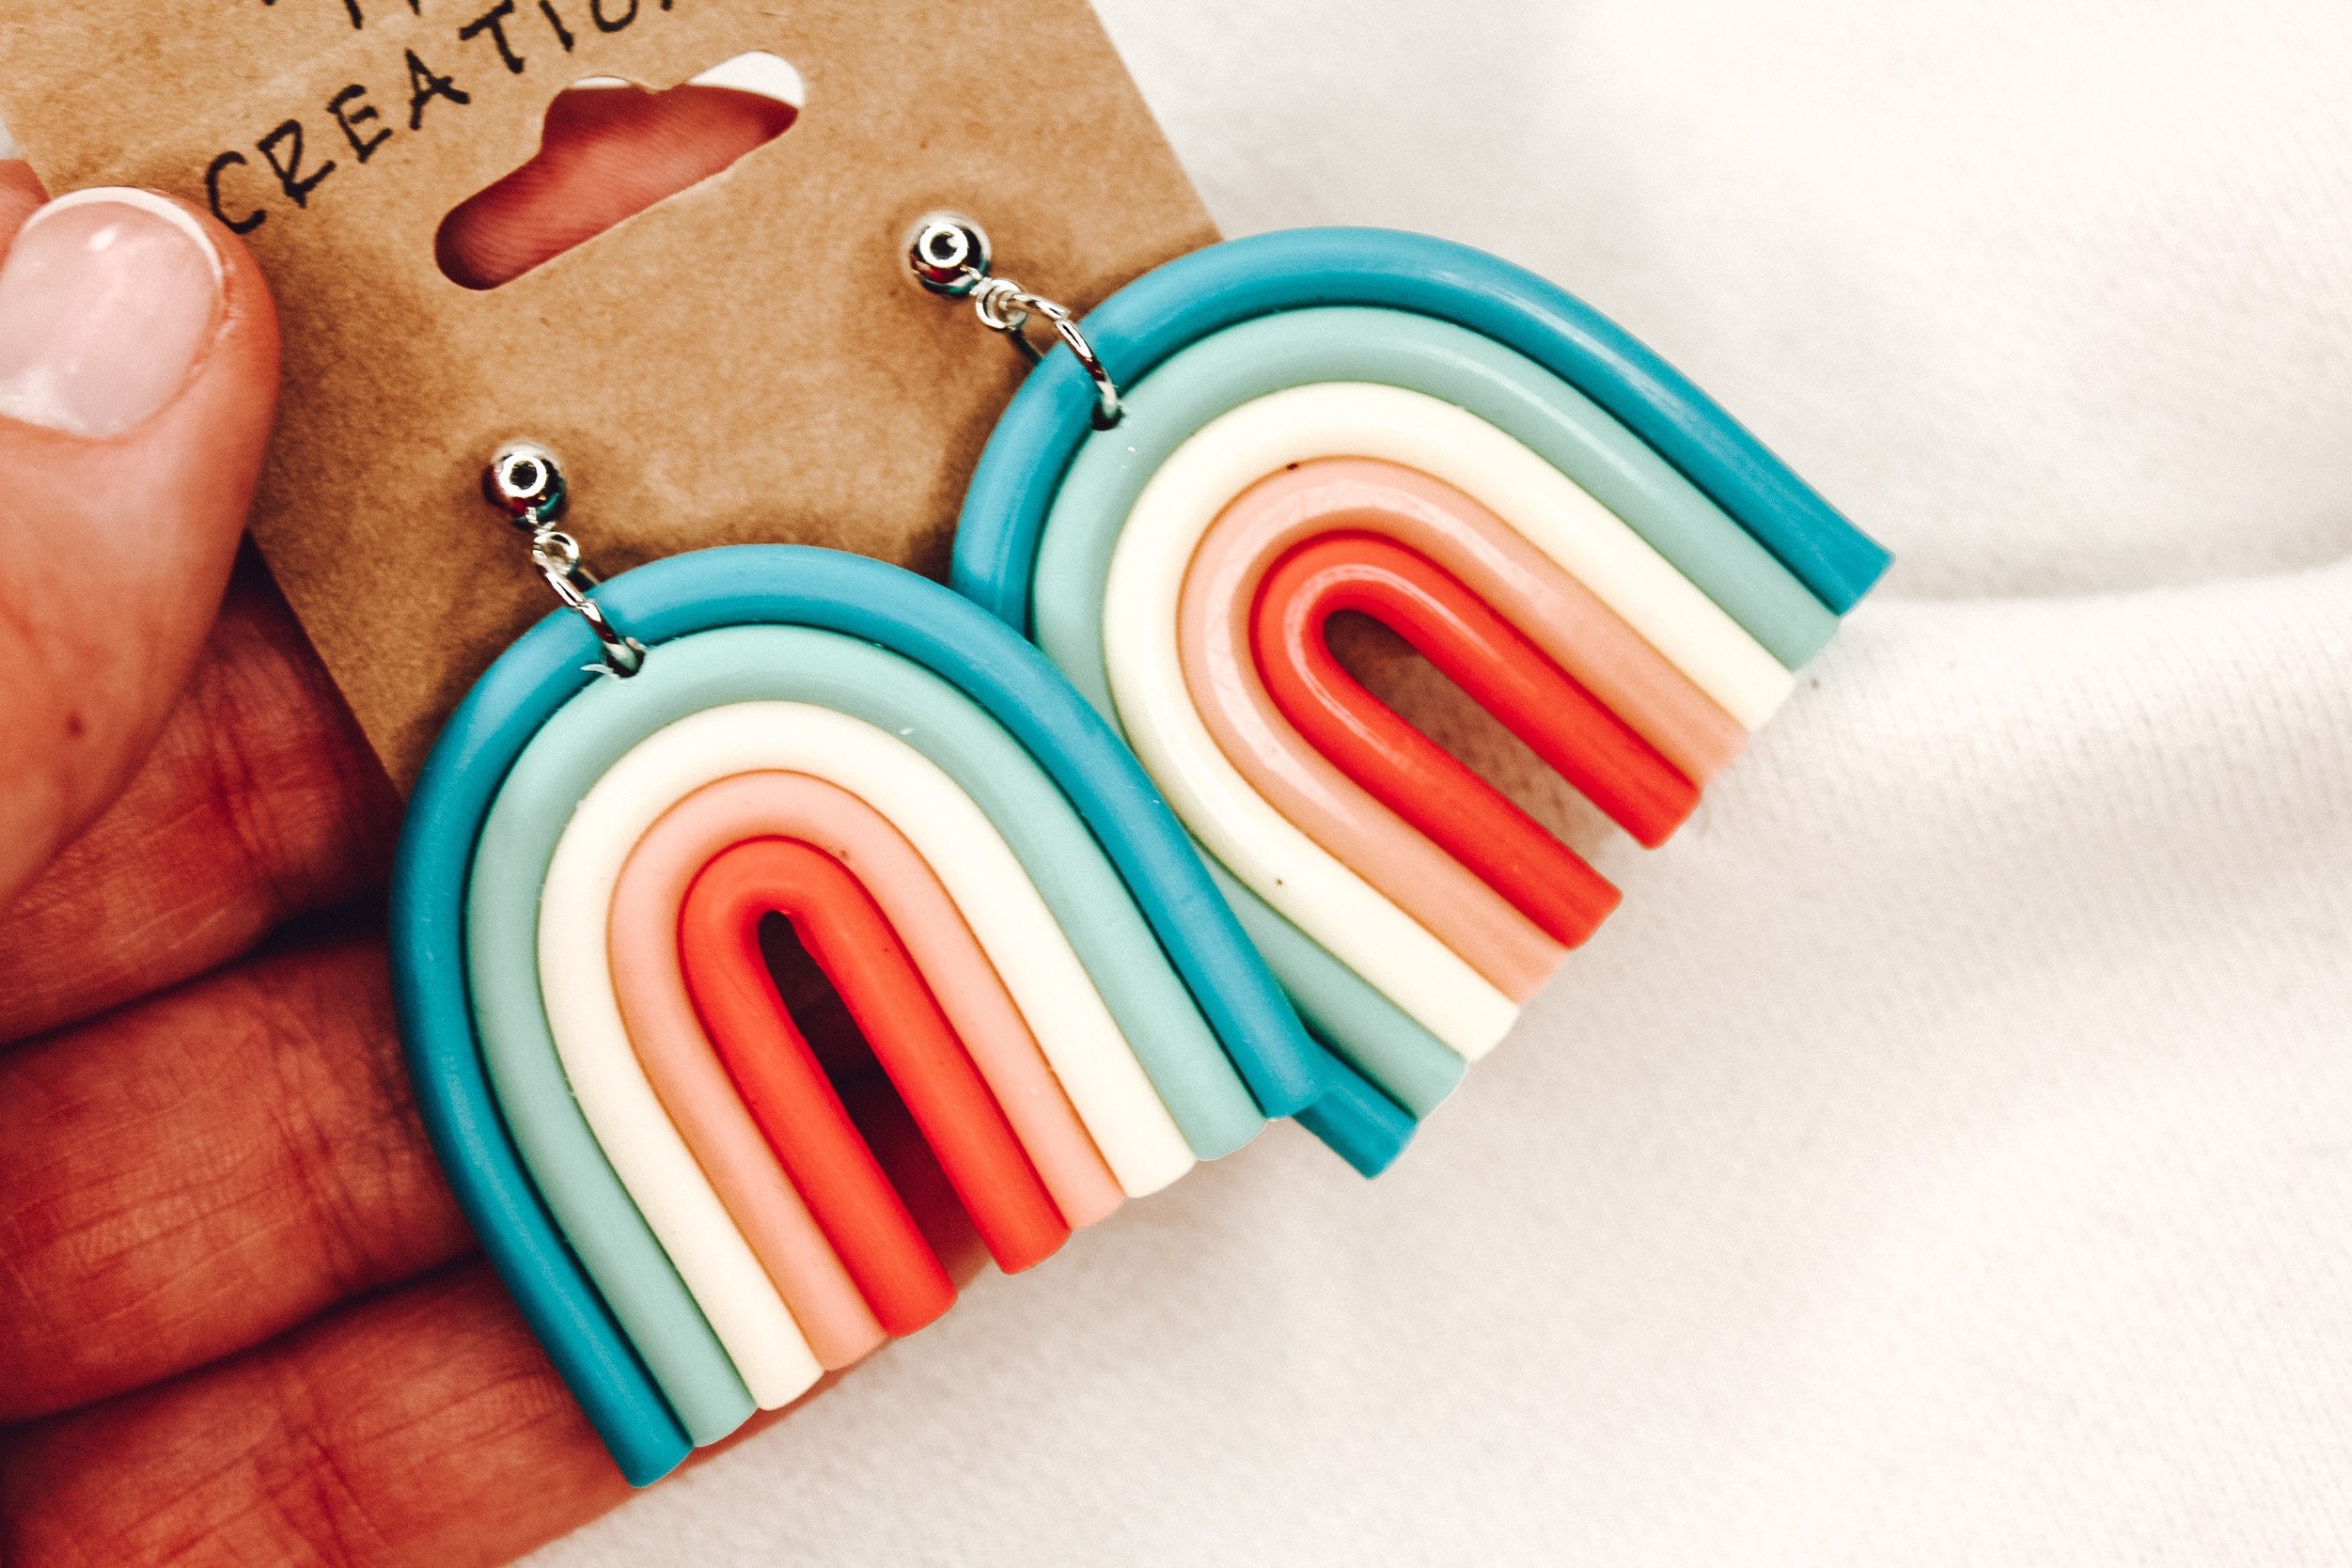 Multicolor Polymer Clay Drop Rainbow Earrings. - Approximat (246873)